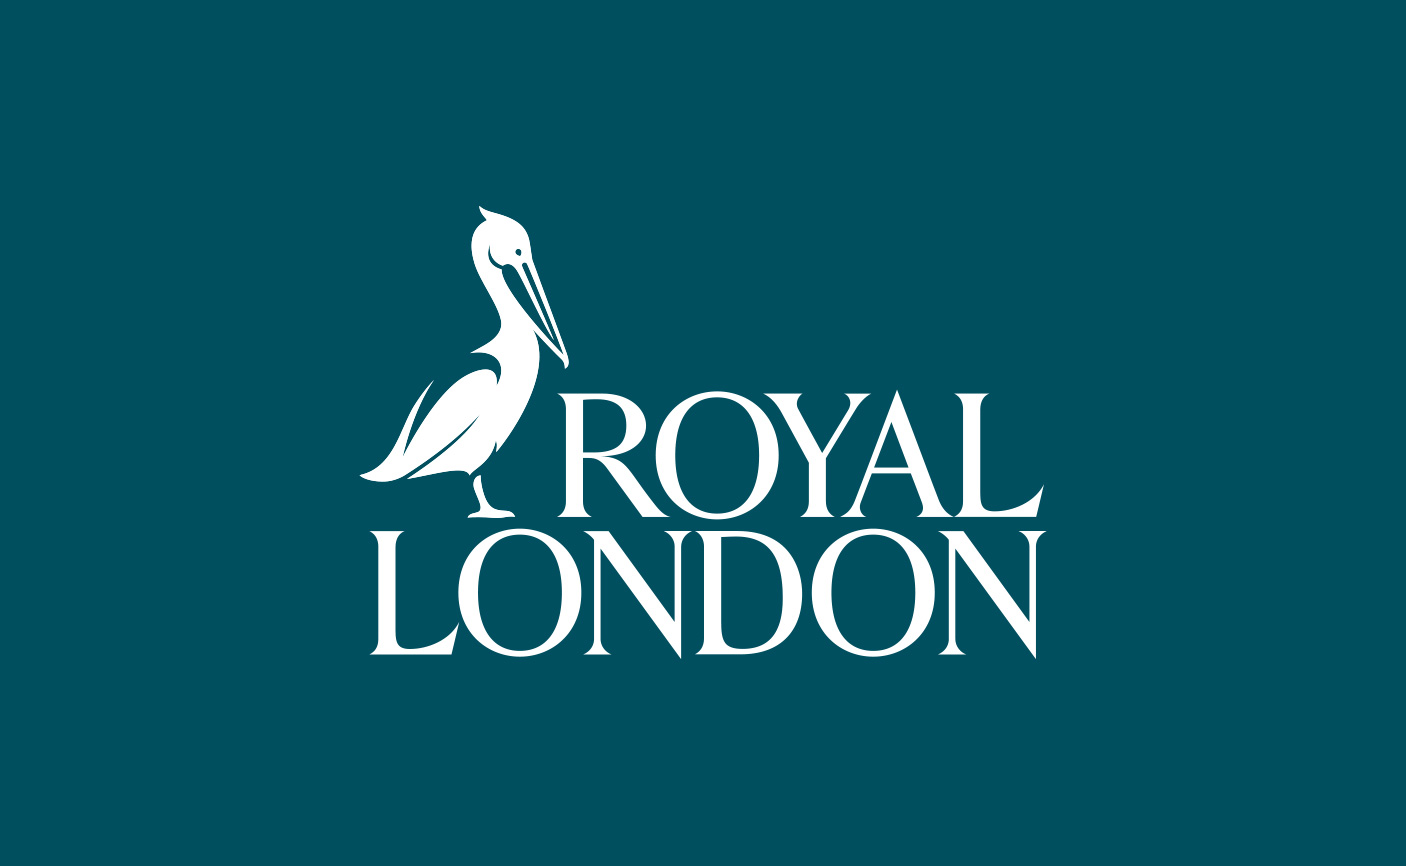 Royal London improves operational efficiency with stibo systems mdm